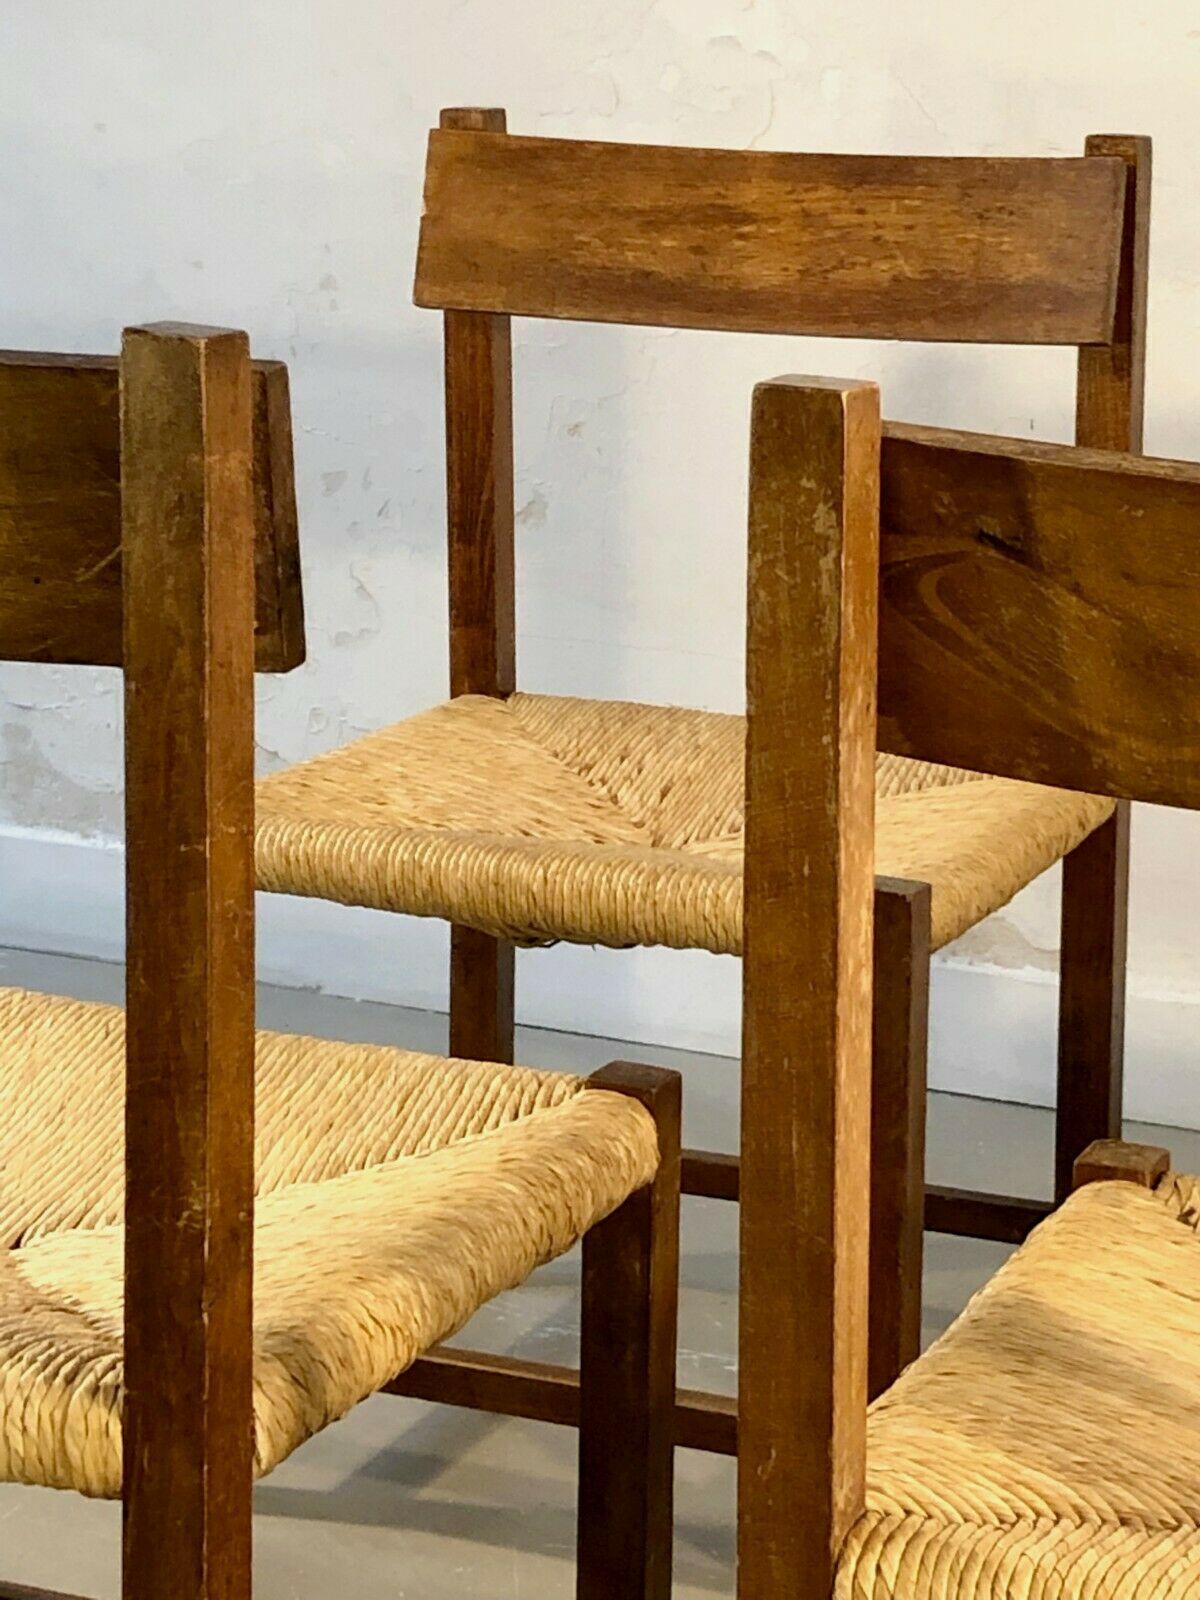 A set of 6 rigorous geometrical chairs, Modernist, Brutalist, Constructivist, with geometrical wooden structures of cubic section, straw seats, the backrest being slightly shifted from the structure giving a beautiful asymmetrical effect and the